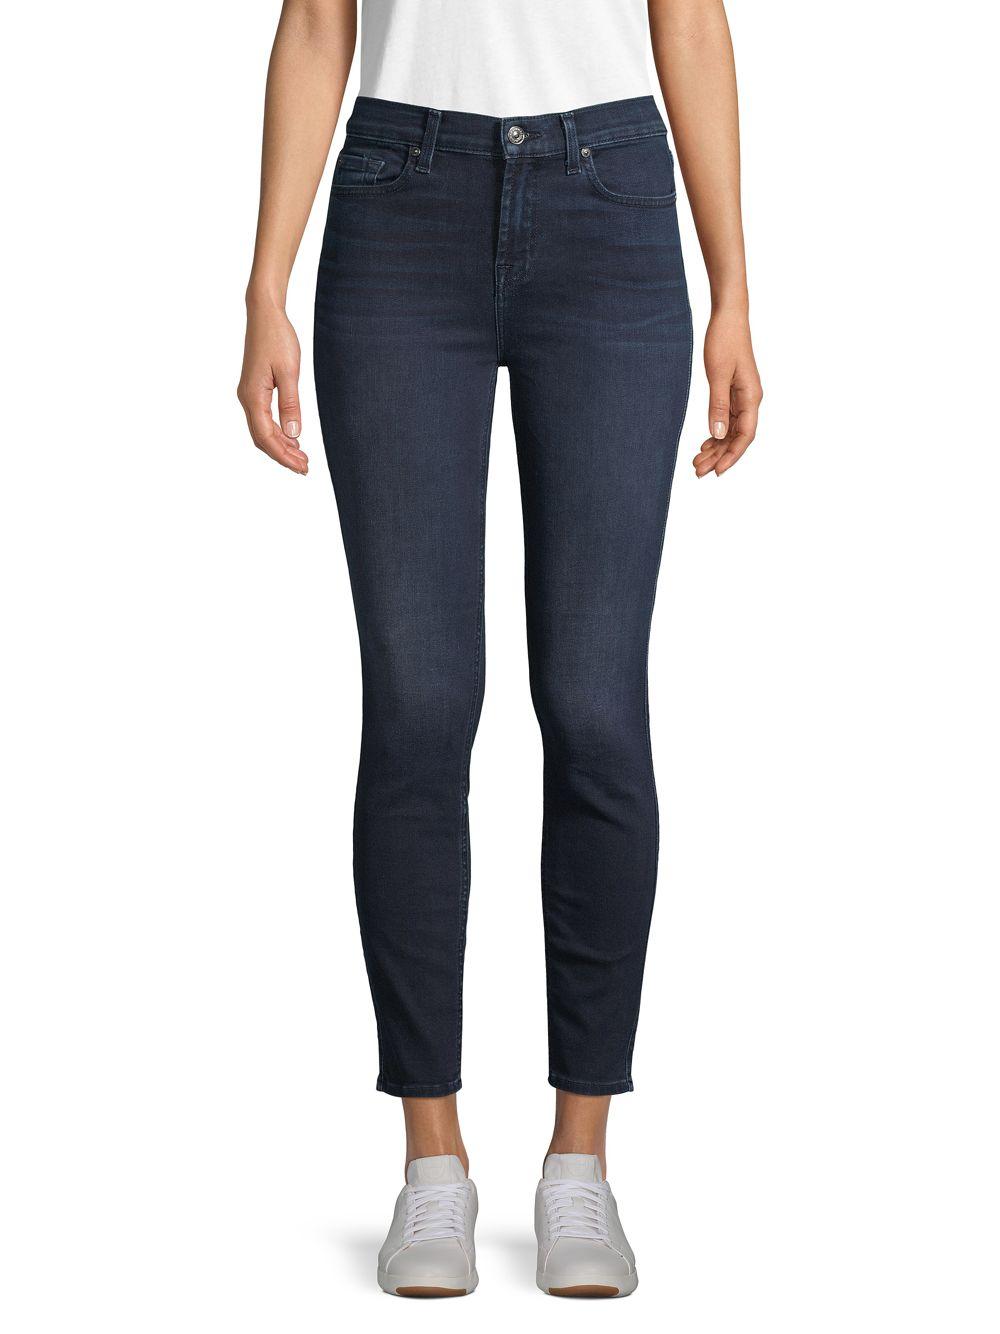 Lyst - 7 For All Mankind Gwenevere High-waist Ankle Skinny Jeans in Blue